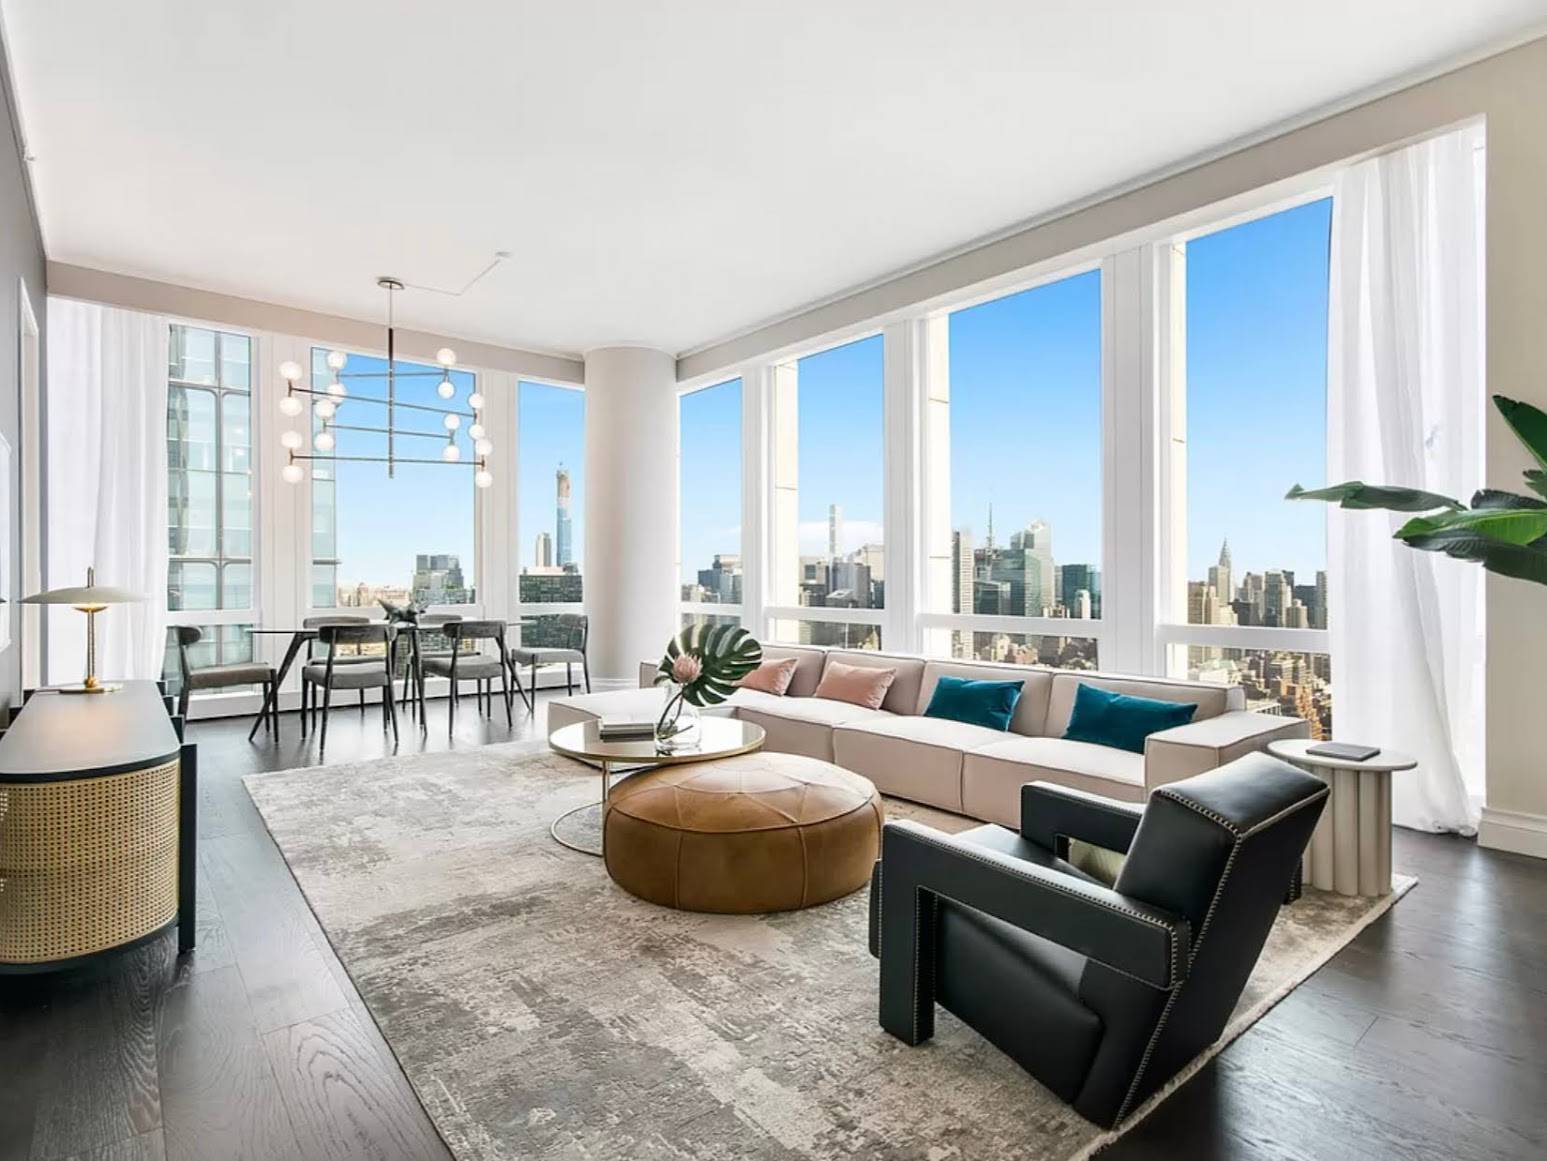 New York City Duplex | North, East and South Views of NYC and Water | 6000+ SF with 7 Bedrooms| $19M